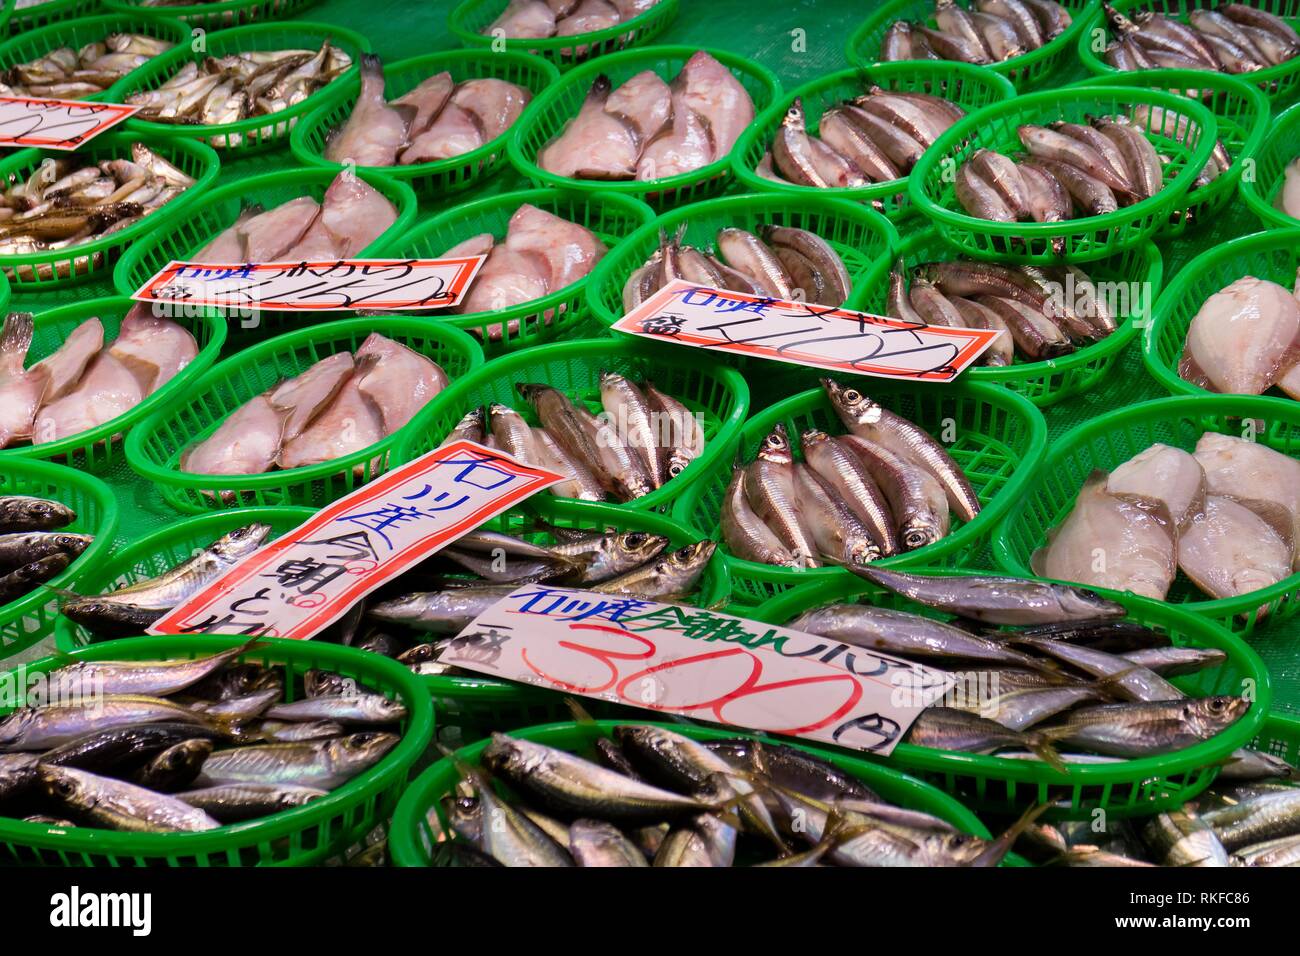 Fresh seafood in green plastic baskets at the Omicho Market. Stock Photo